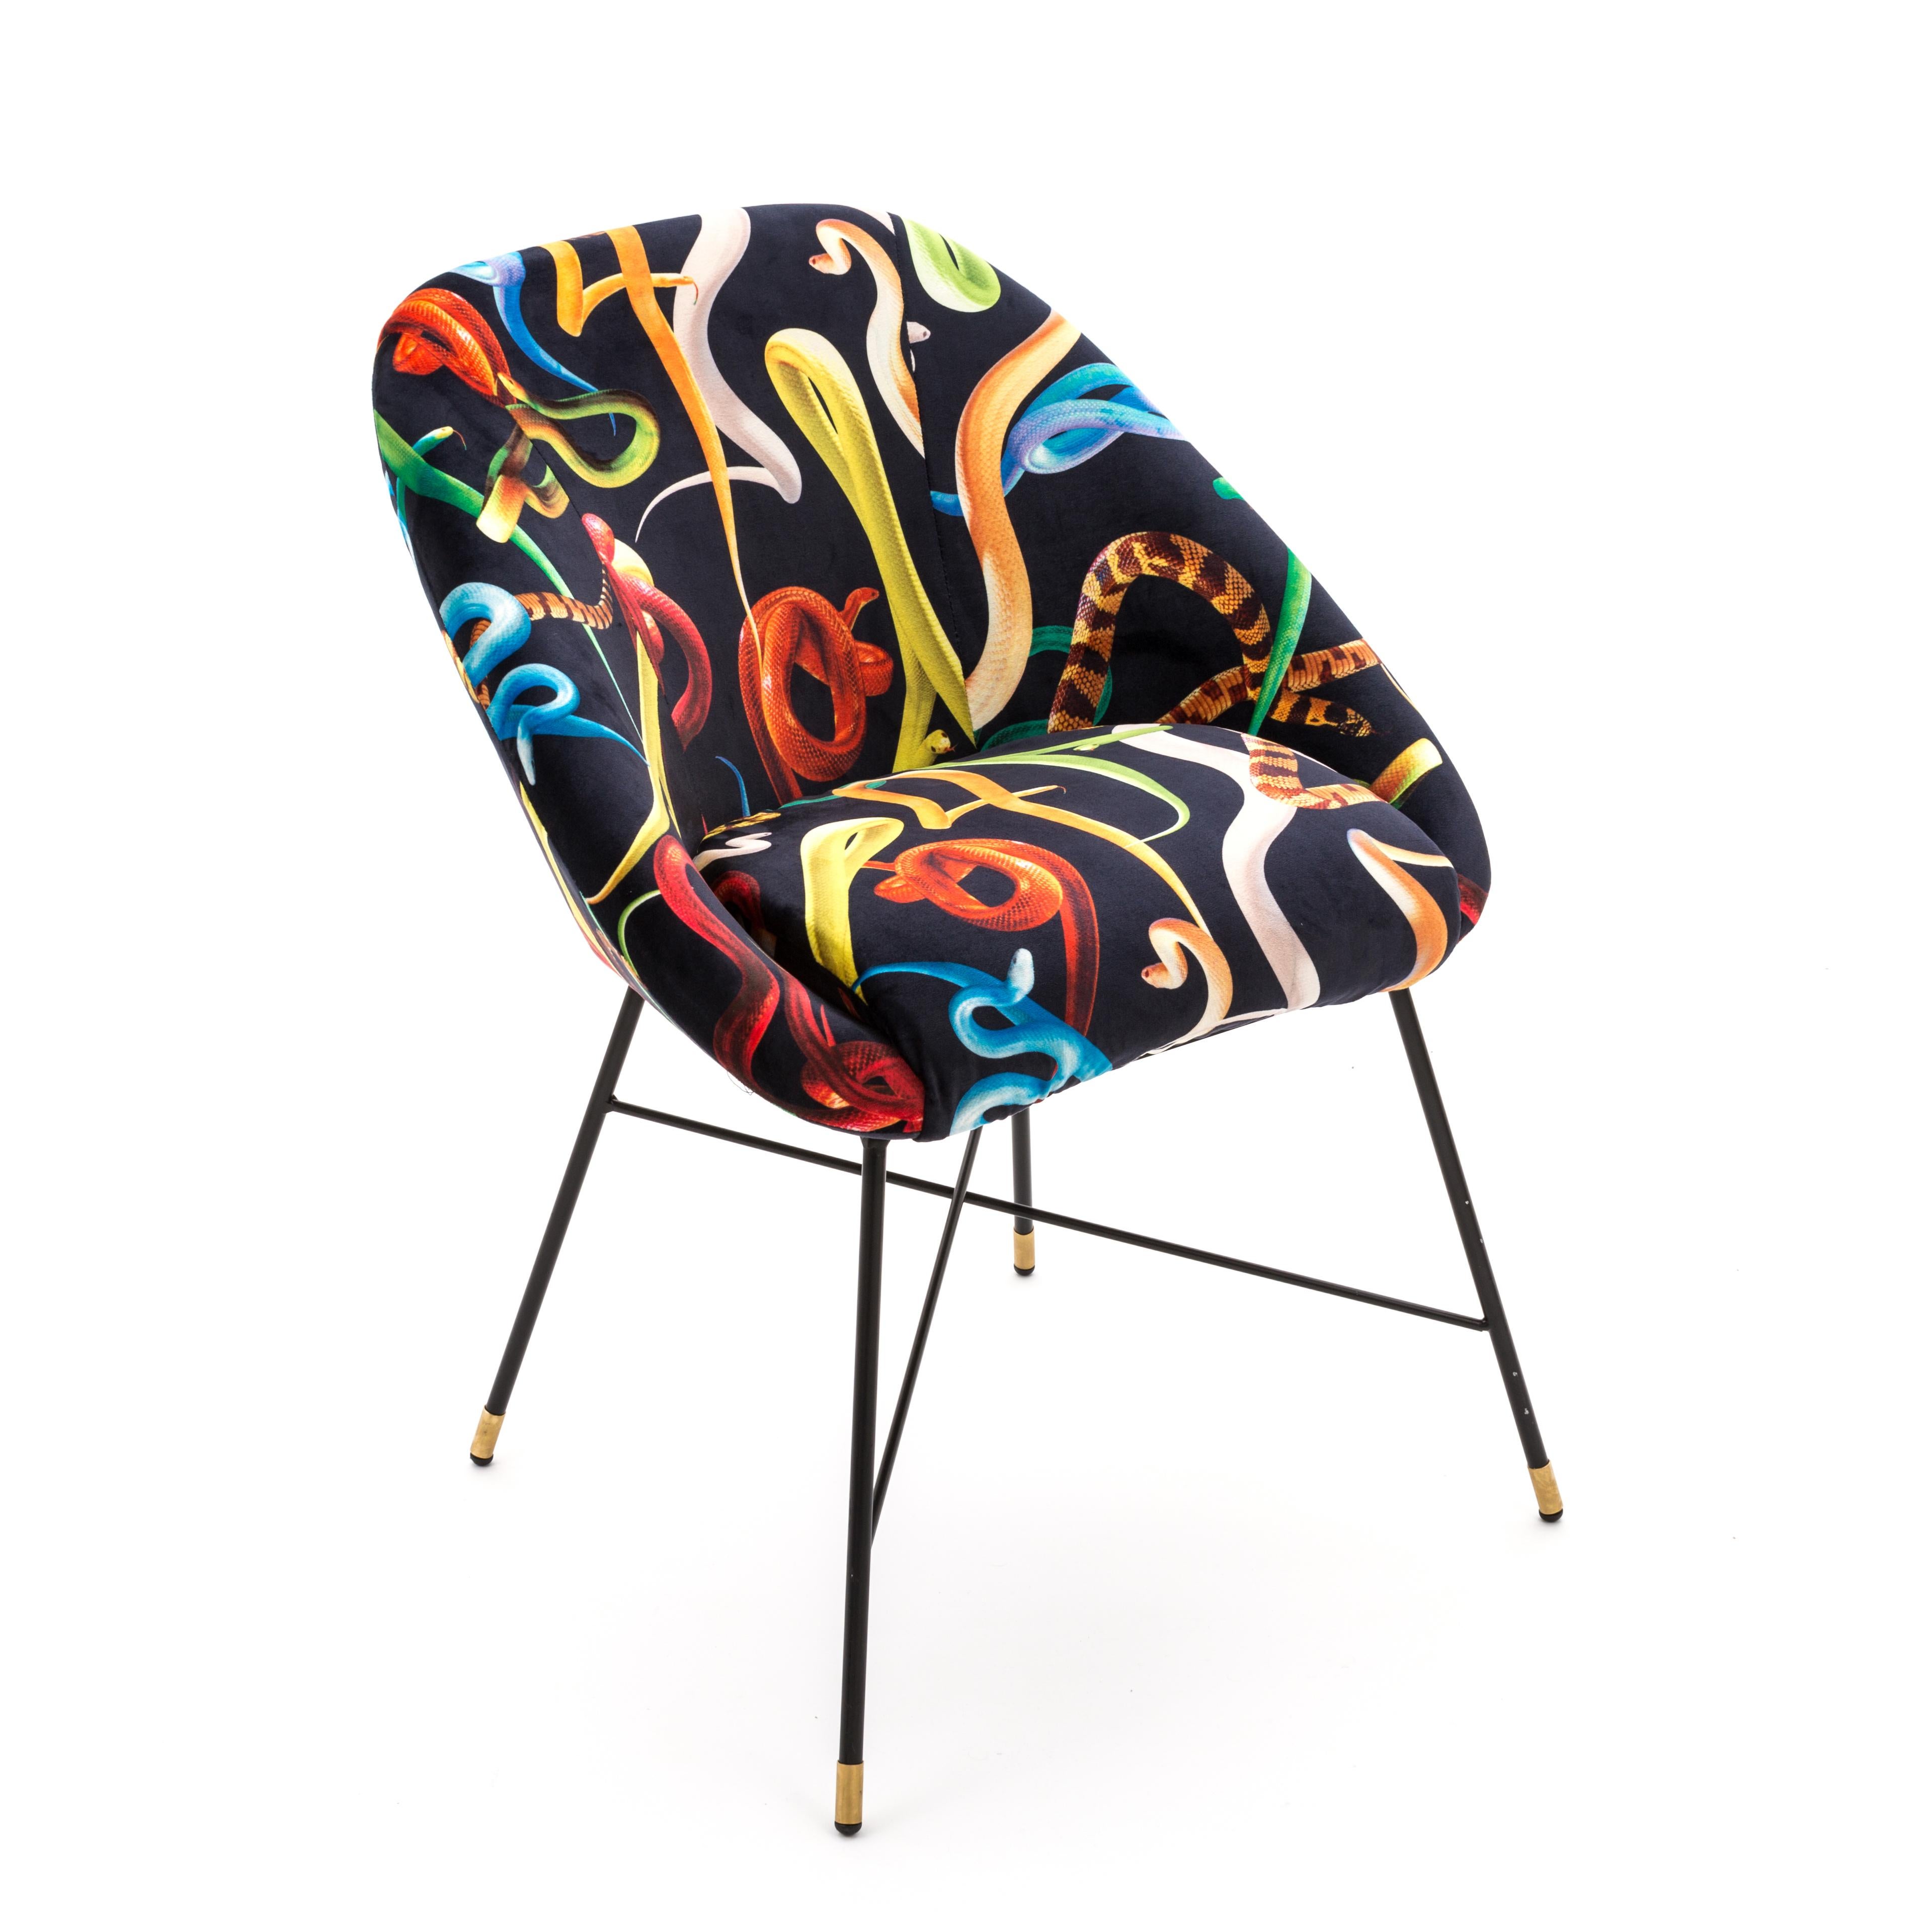 Mix and match the wildest graphics designed by Toiletpaper and get the most iconic dining room of all.

- Material: fabrics in polyester, frame in wood with polyurethane padding and metal
- Size: Cm 60 x 50 H 72.
 